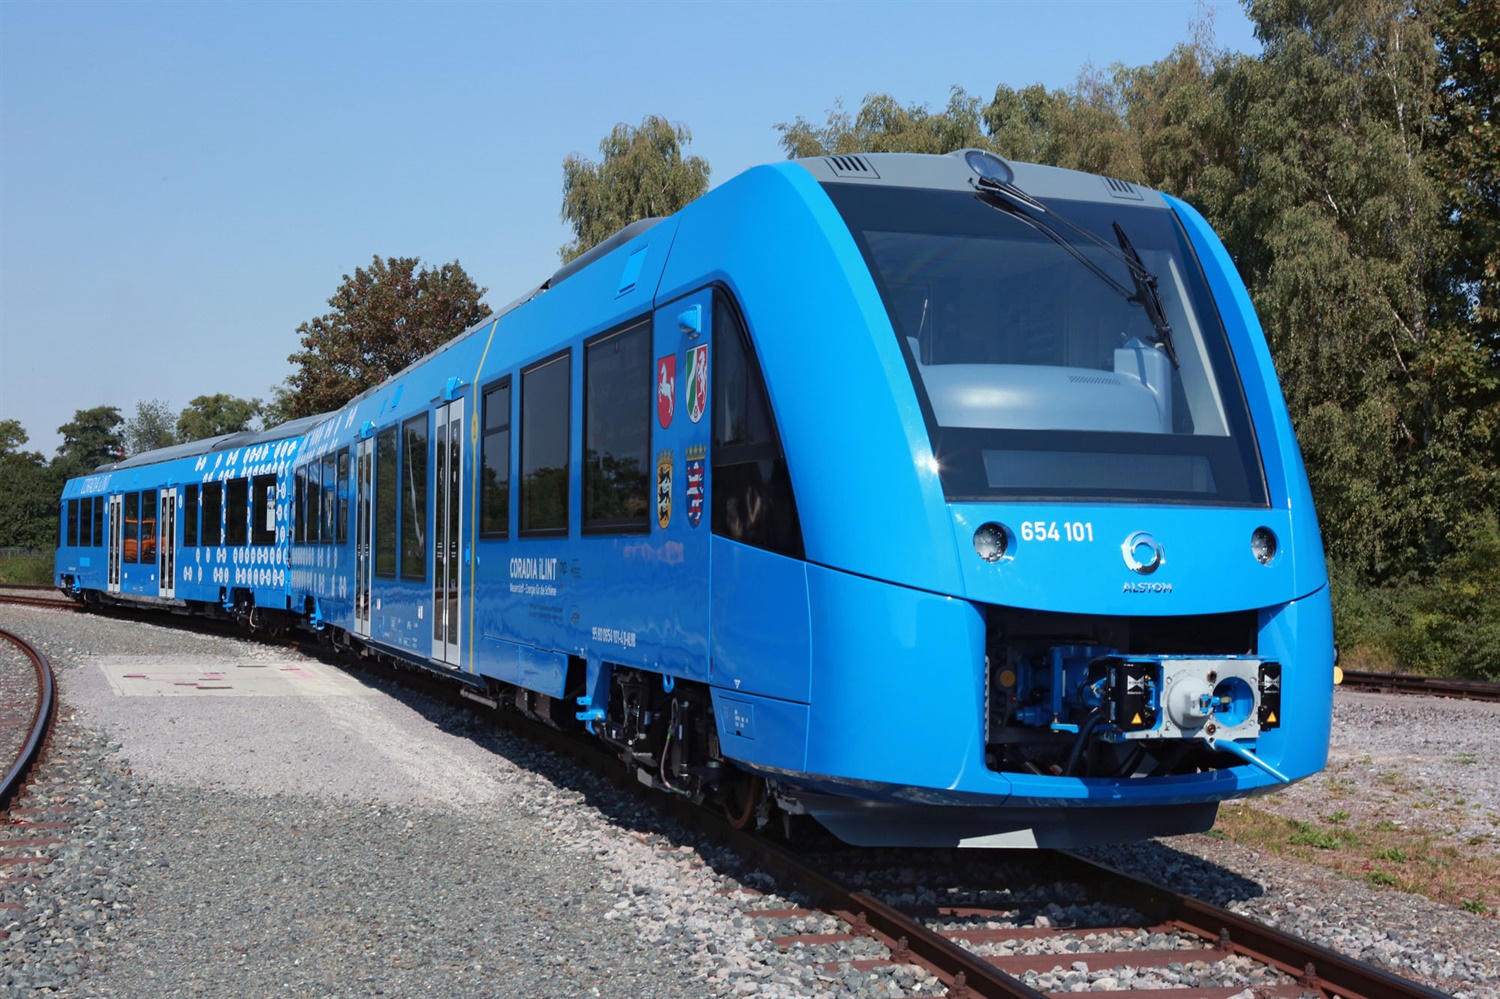 Alstom and Eversholt team up to fit hydrogen tanks on Class 321s